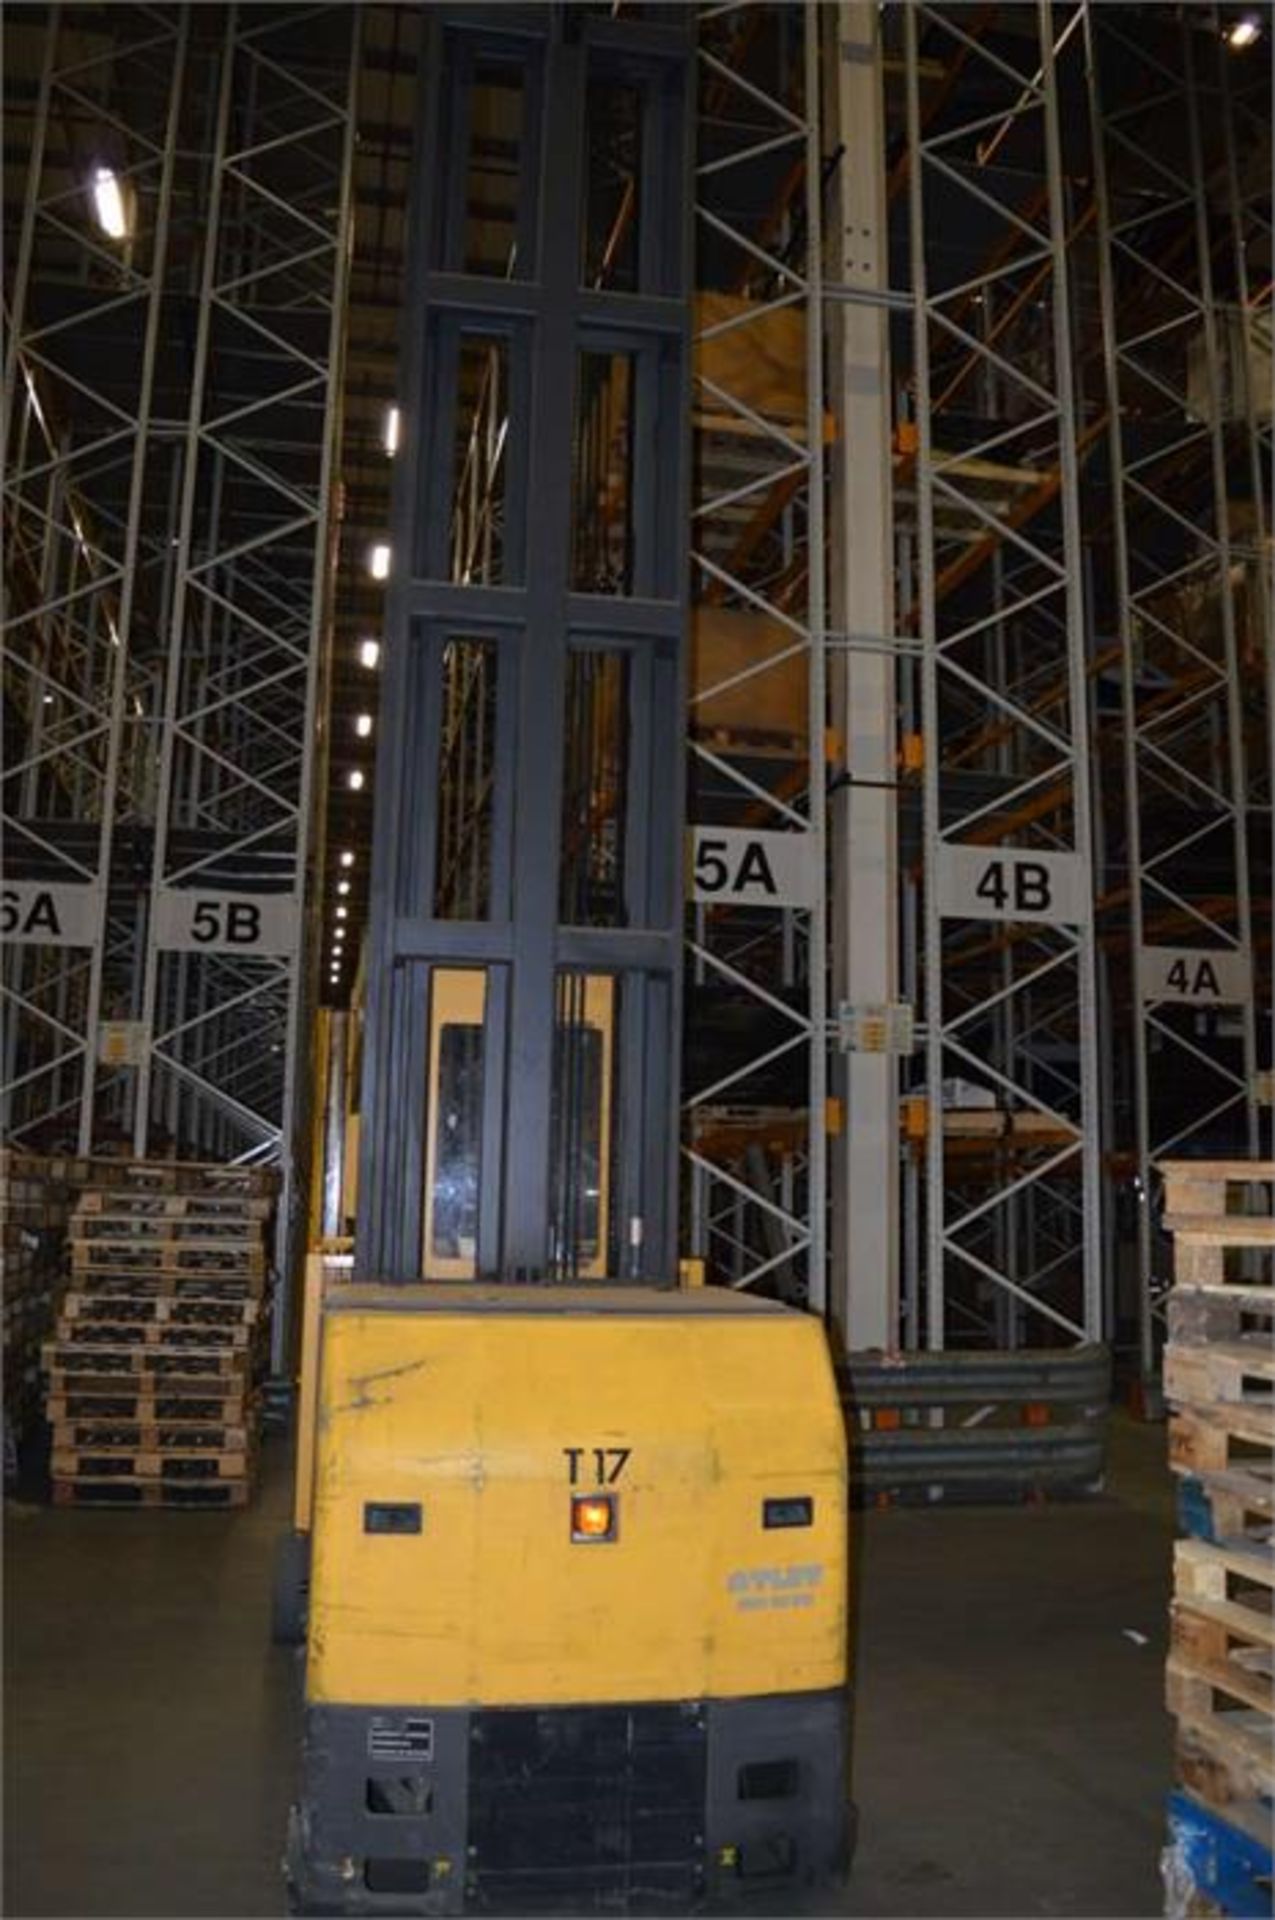 Atlet, Model: OMNI 160T 1350, 1600kg very narrow aisle electric high level order picker, Serial - Image 3 of 6